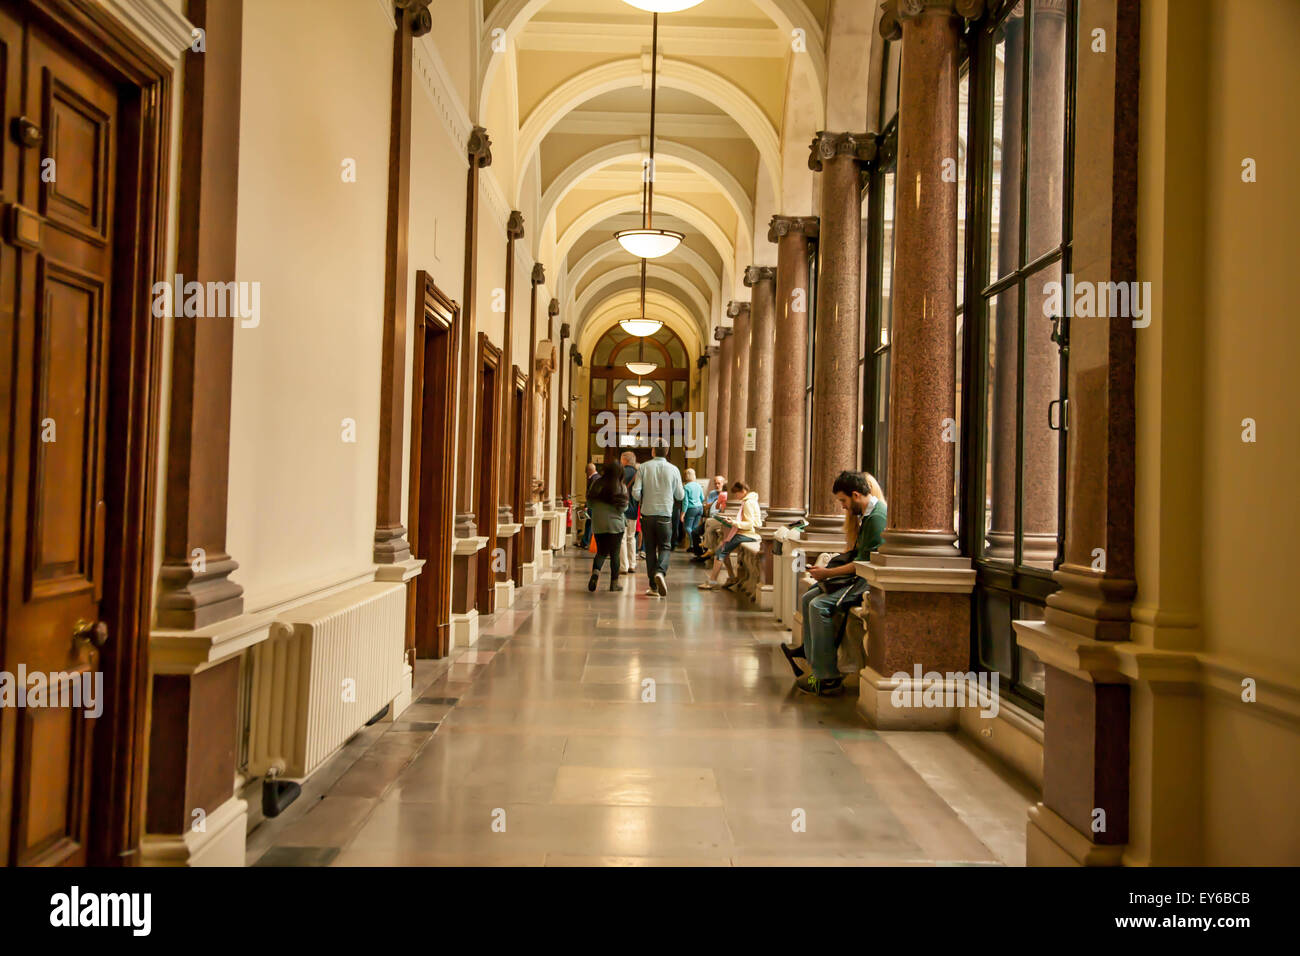 Corridor at Foreign and Commonwealth Office, Whitehall, London, England, UK Stock Photo